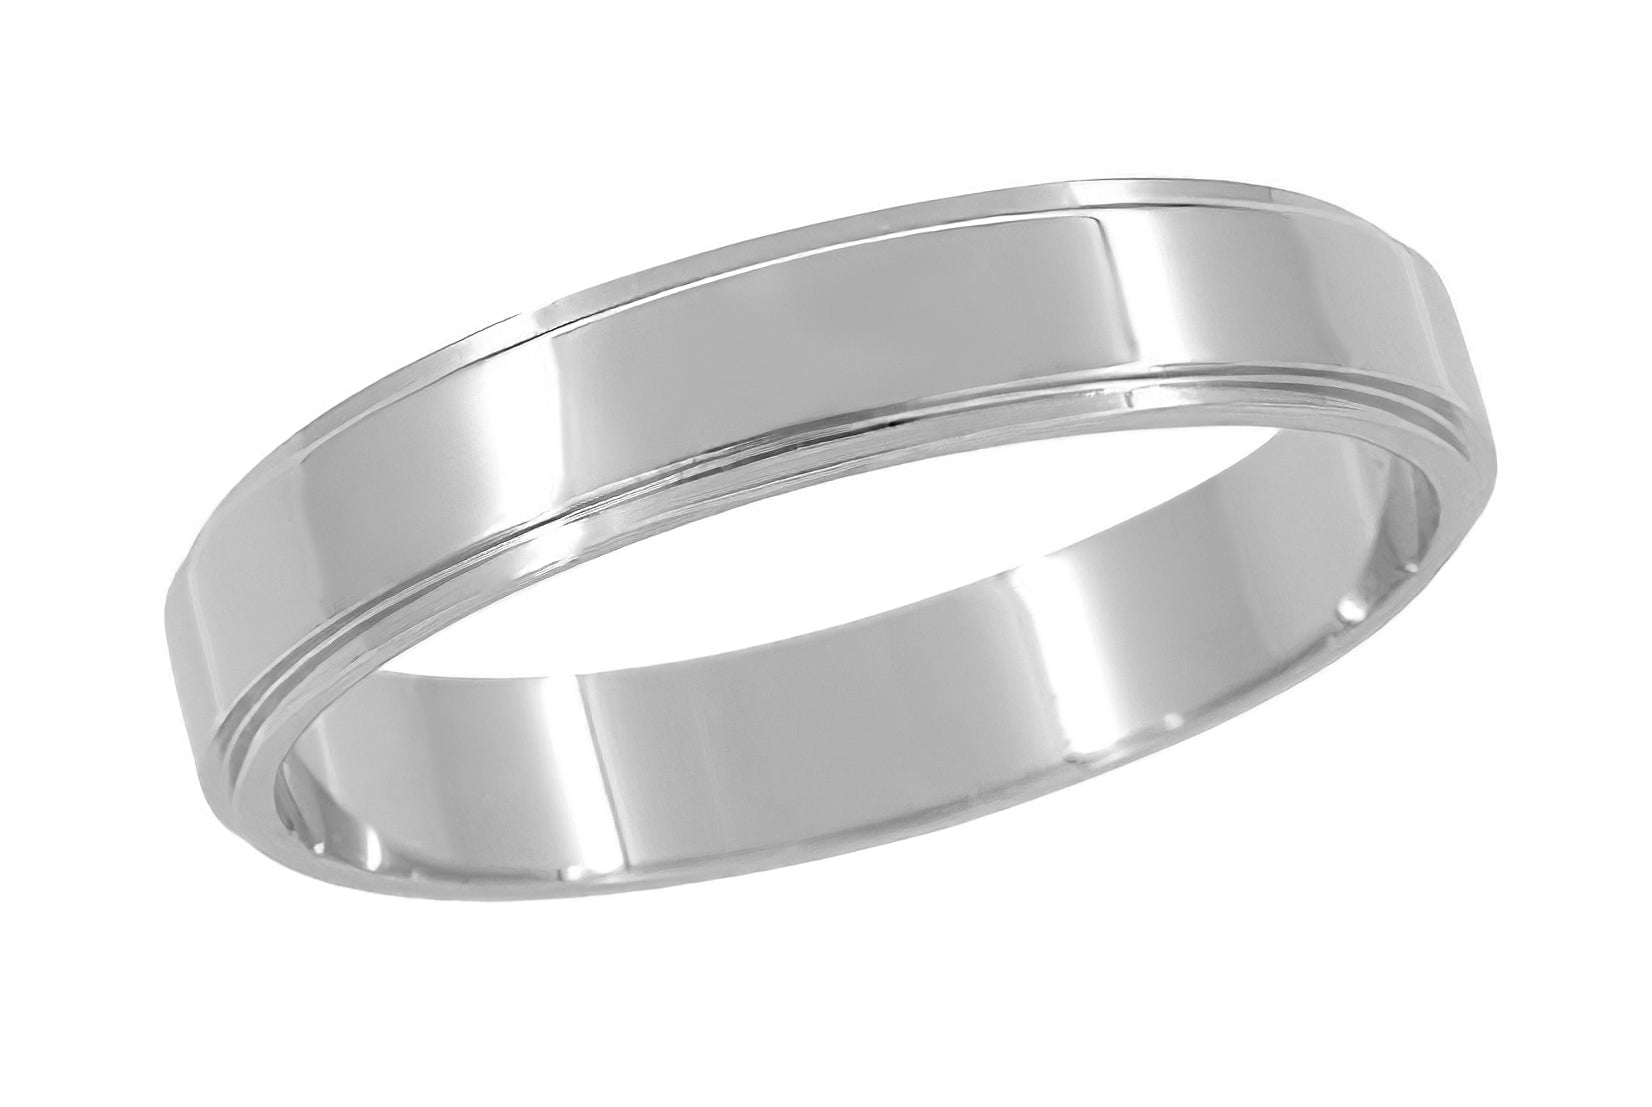 Grooved Edge Retro Wedding Band in White Gold - 4mm Wide - 14K or 18K